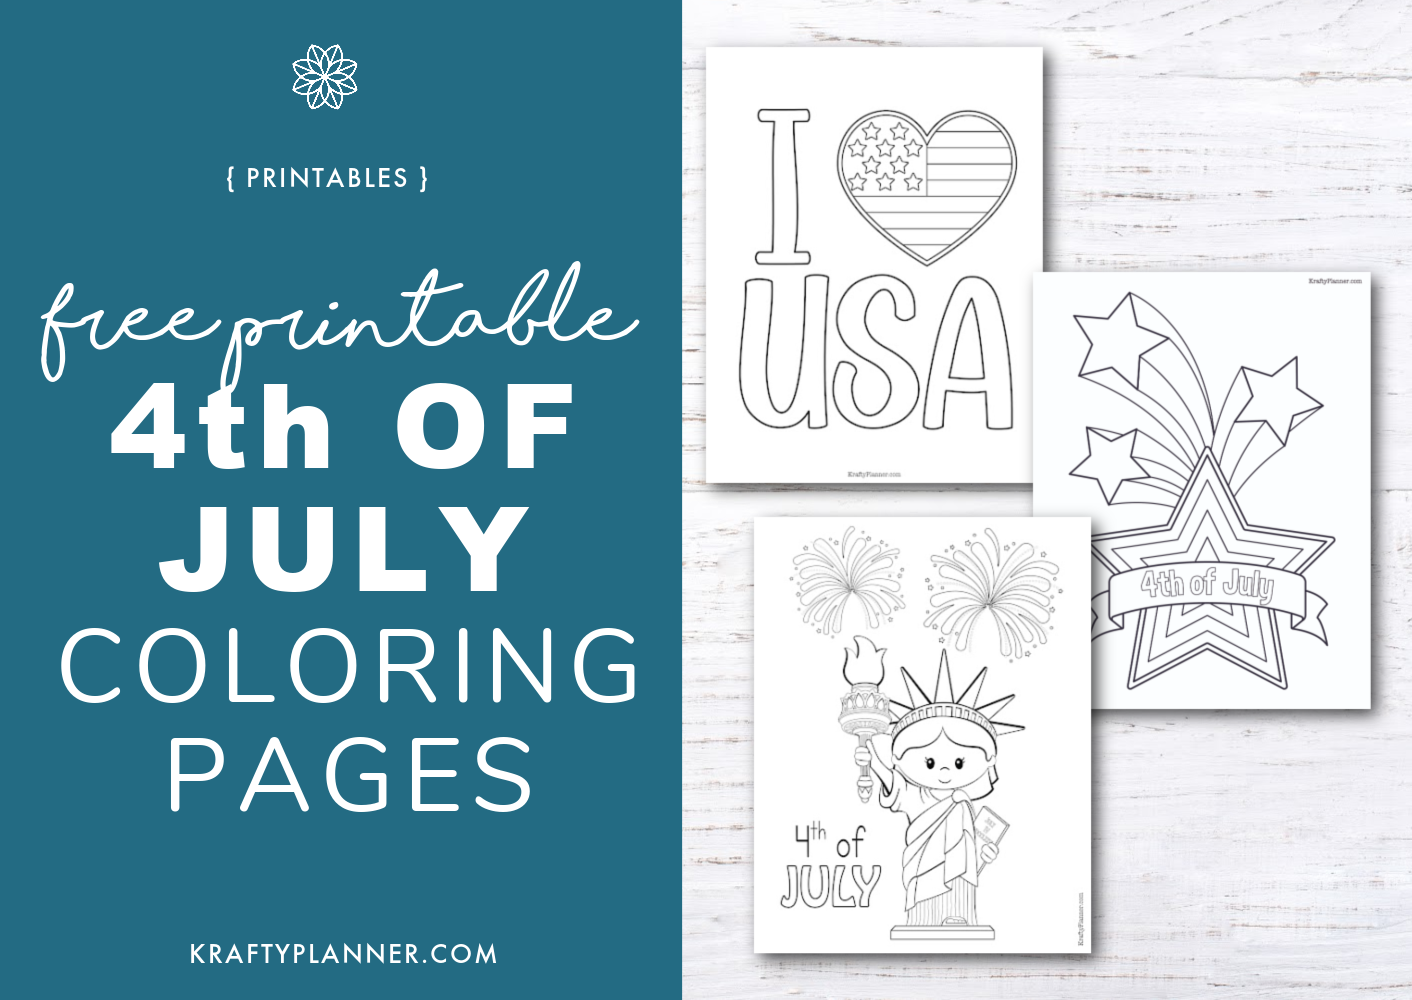 Free printable th of july coloring pages â krafty planner